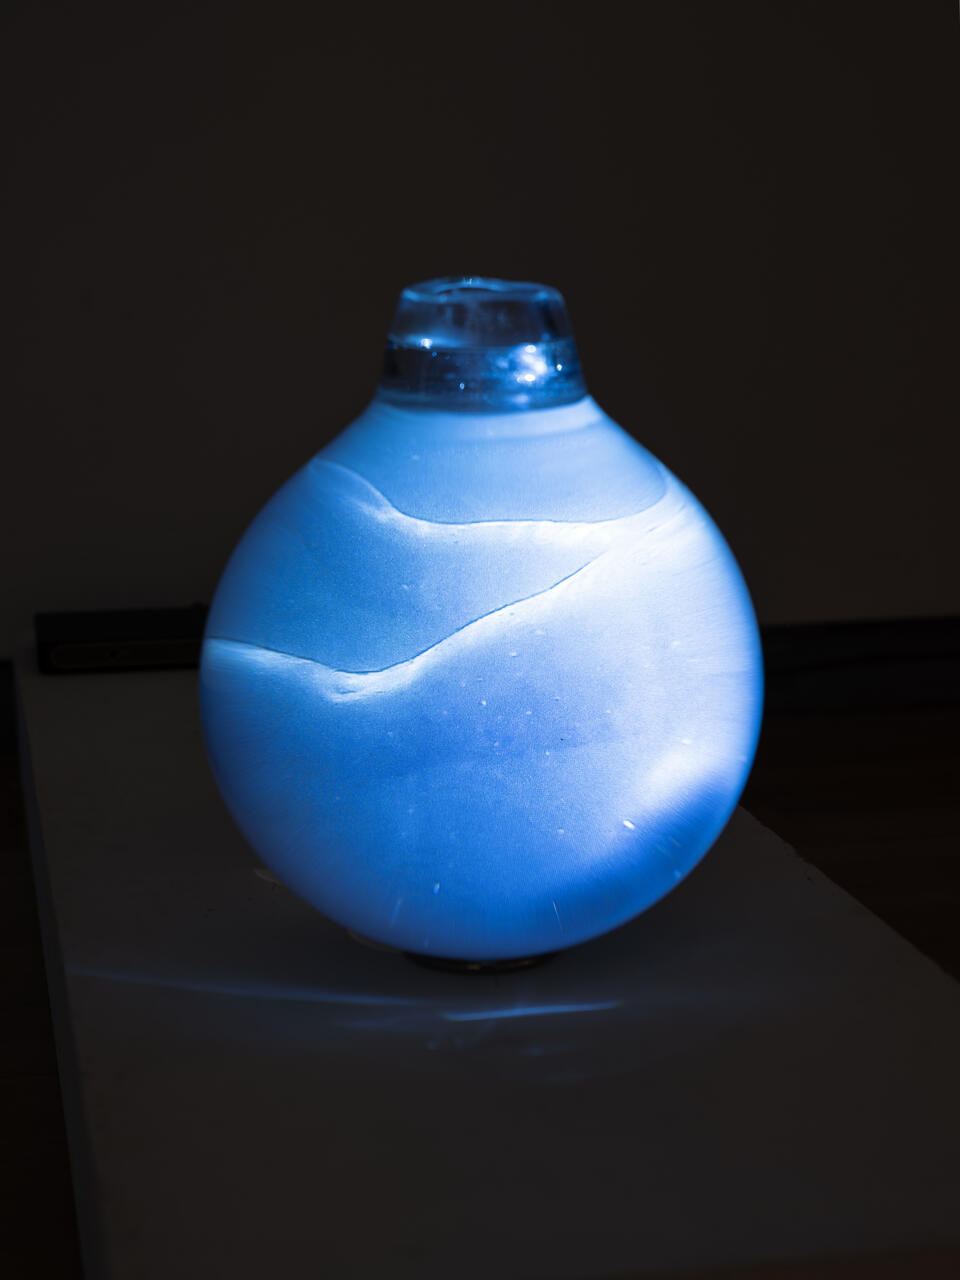 Image of a glass orb with blue light, water and a blurry figure